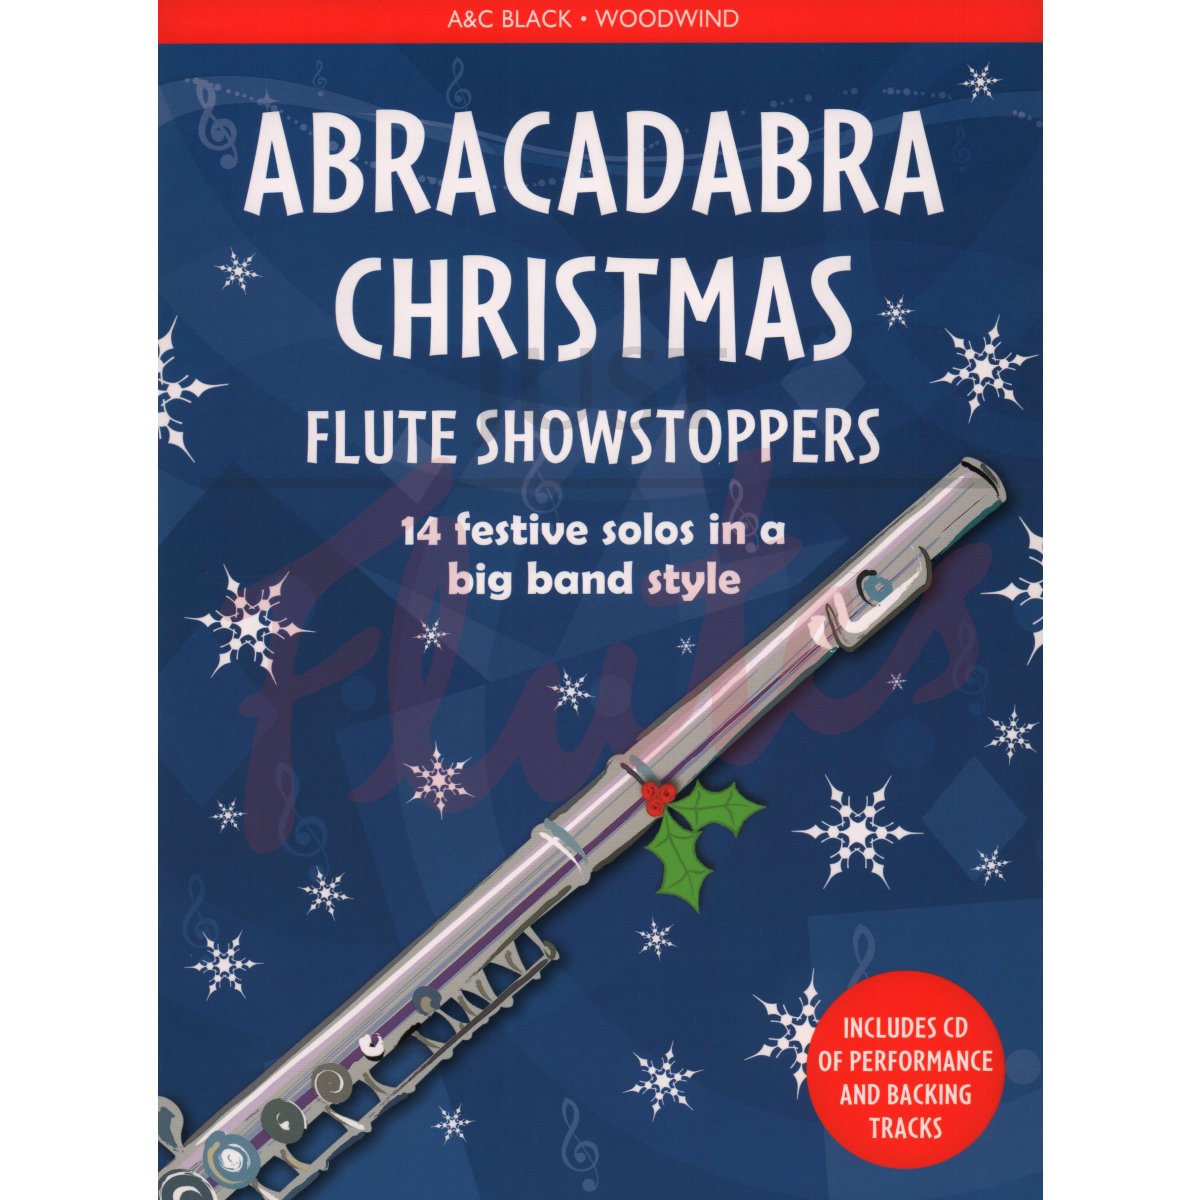 Abracadabra Christmas Flute Showstoppers